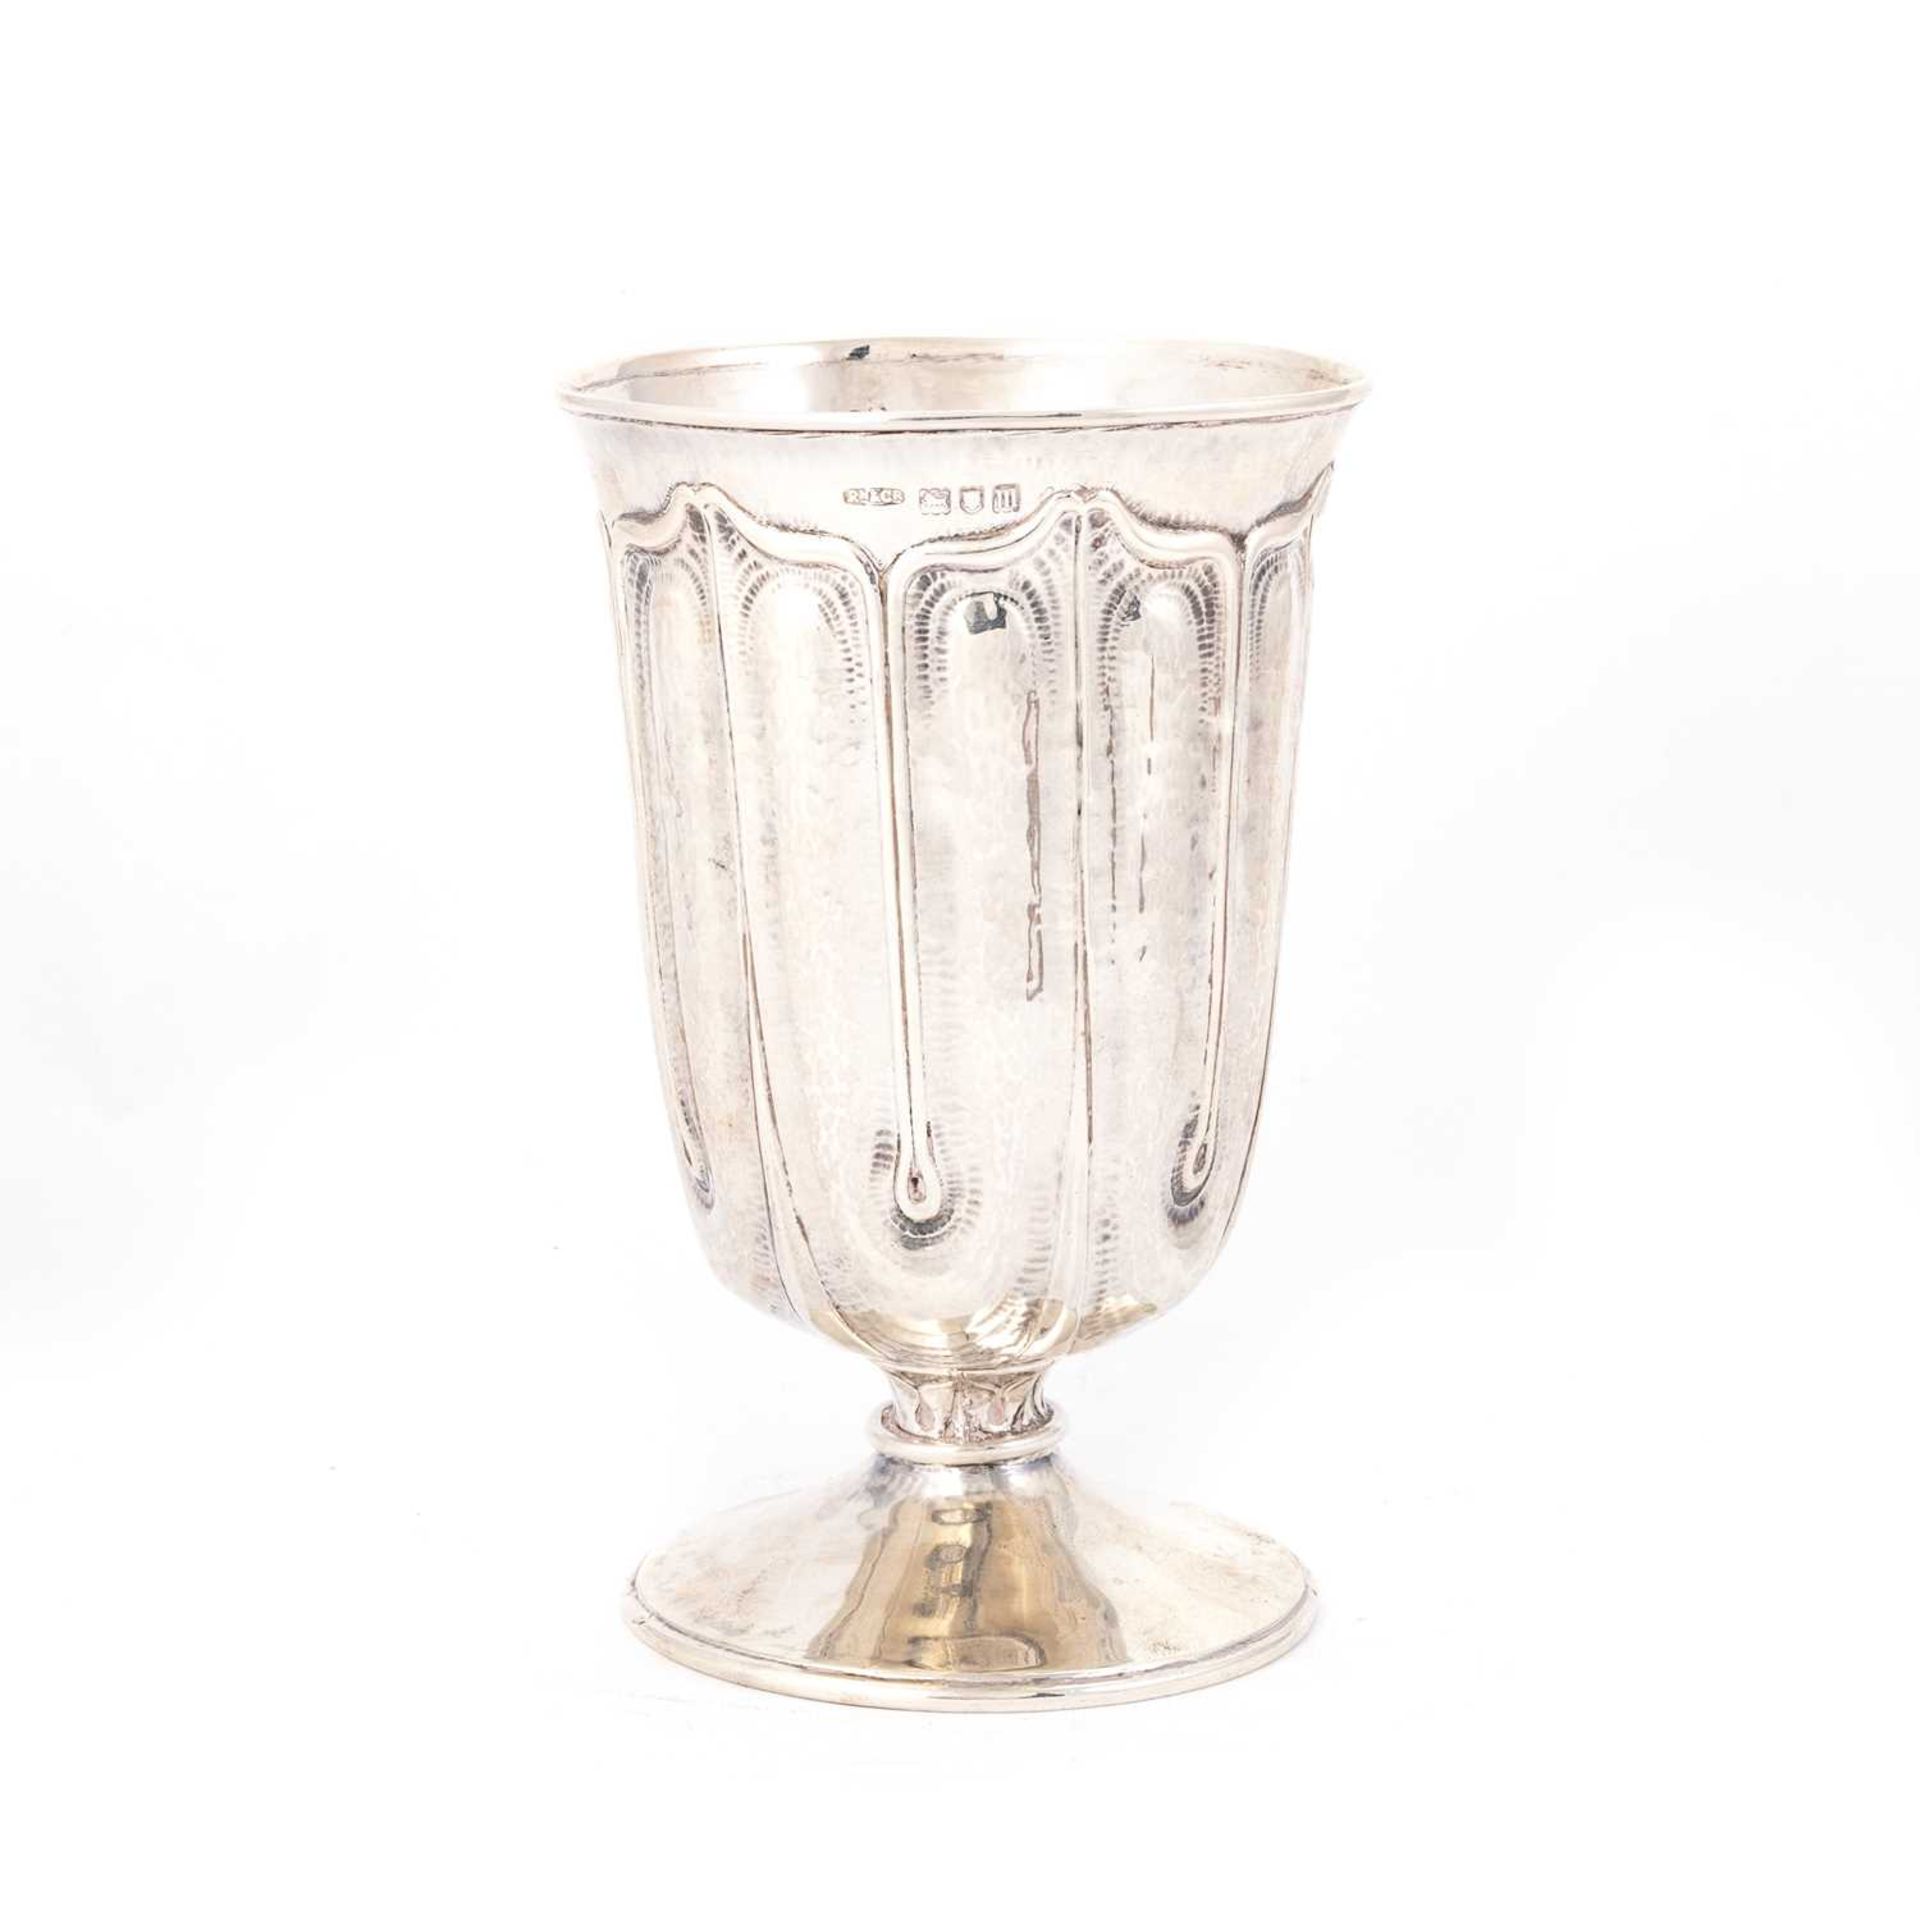 AN ARTS AND CRAFTS SILVER GOBLET